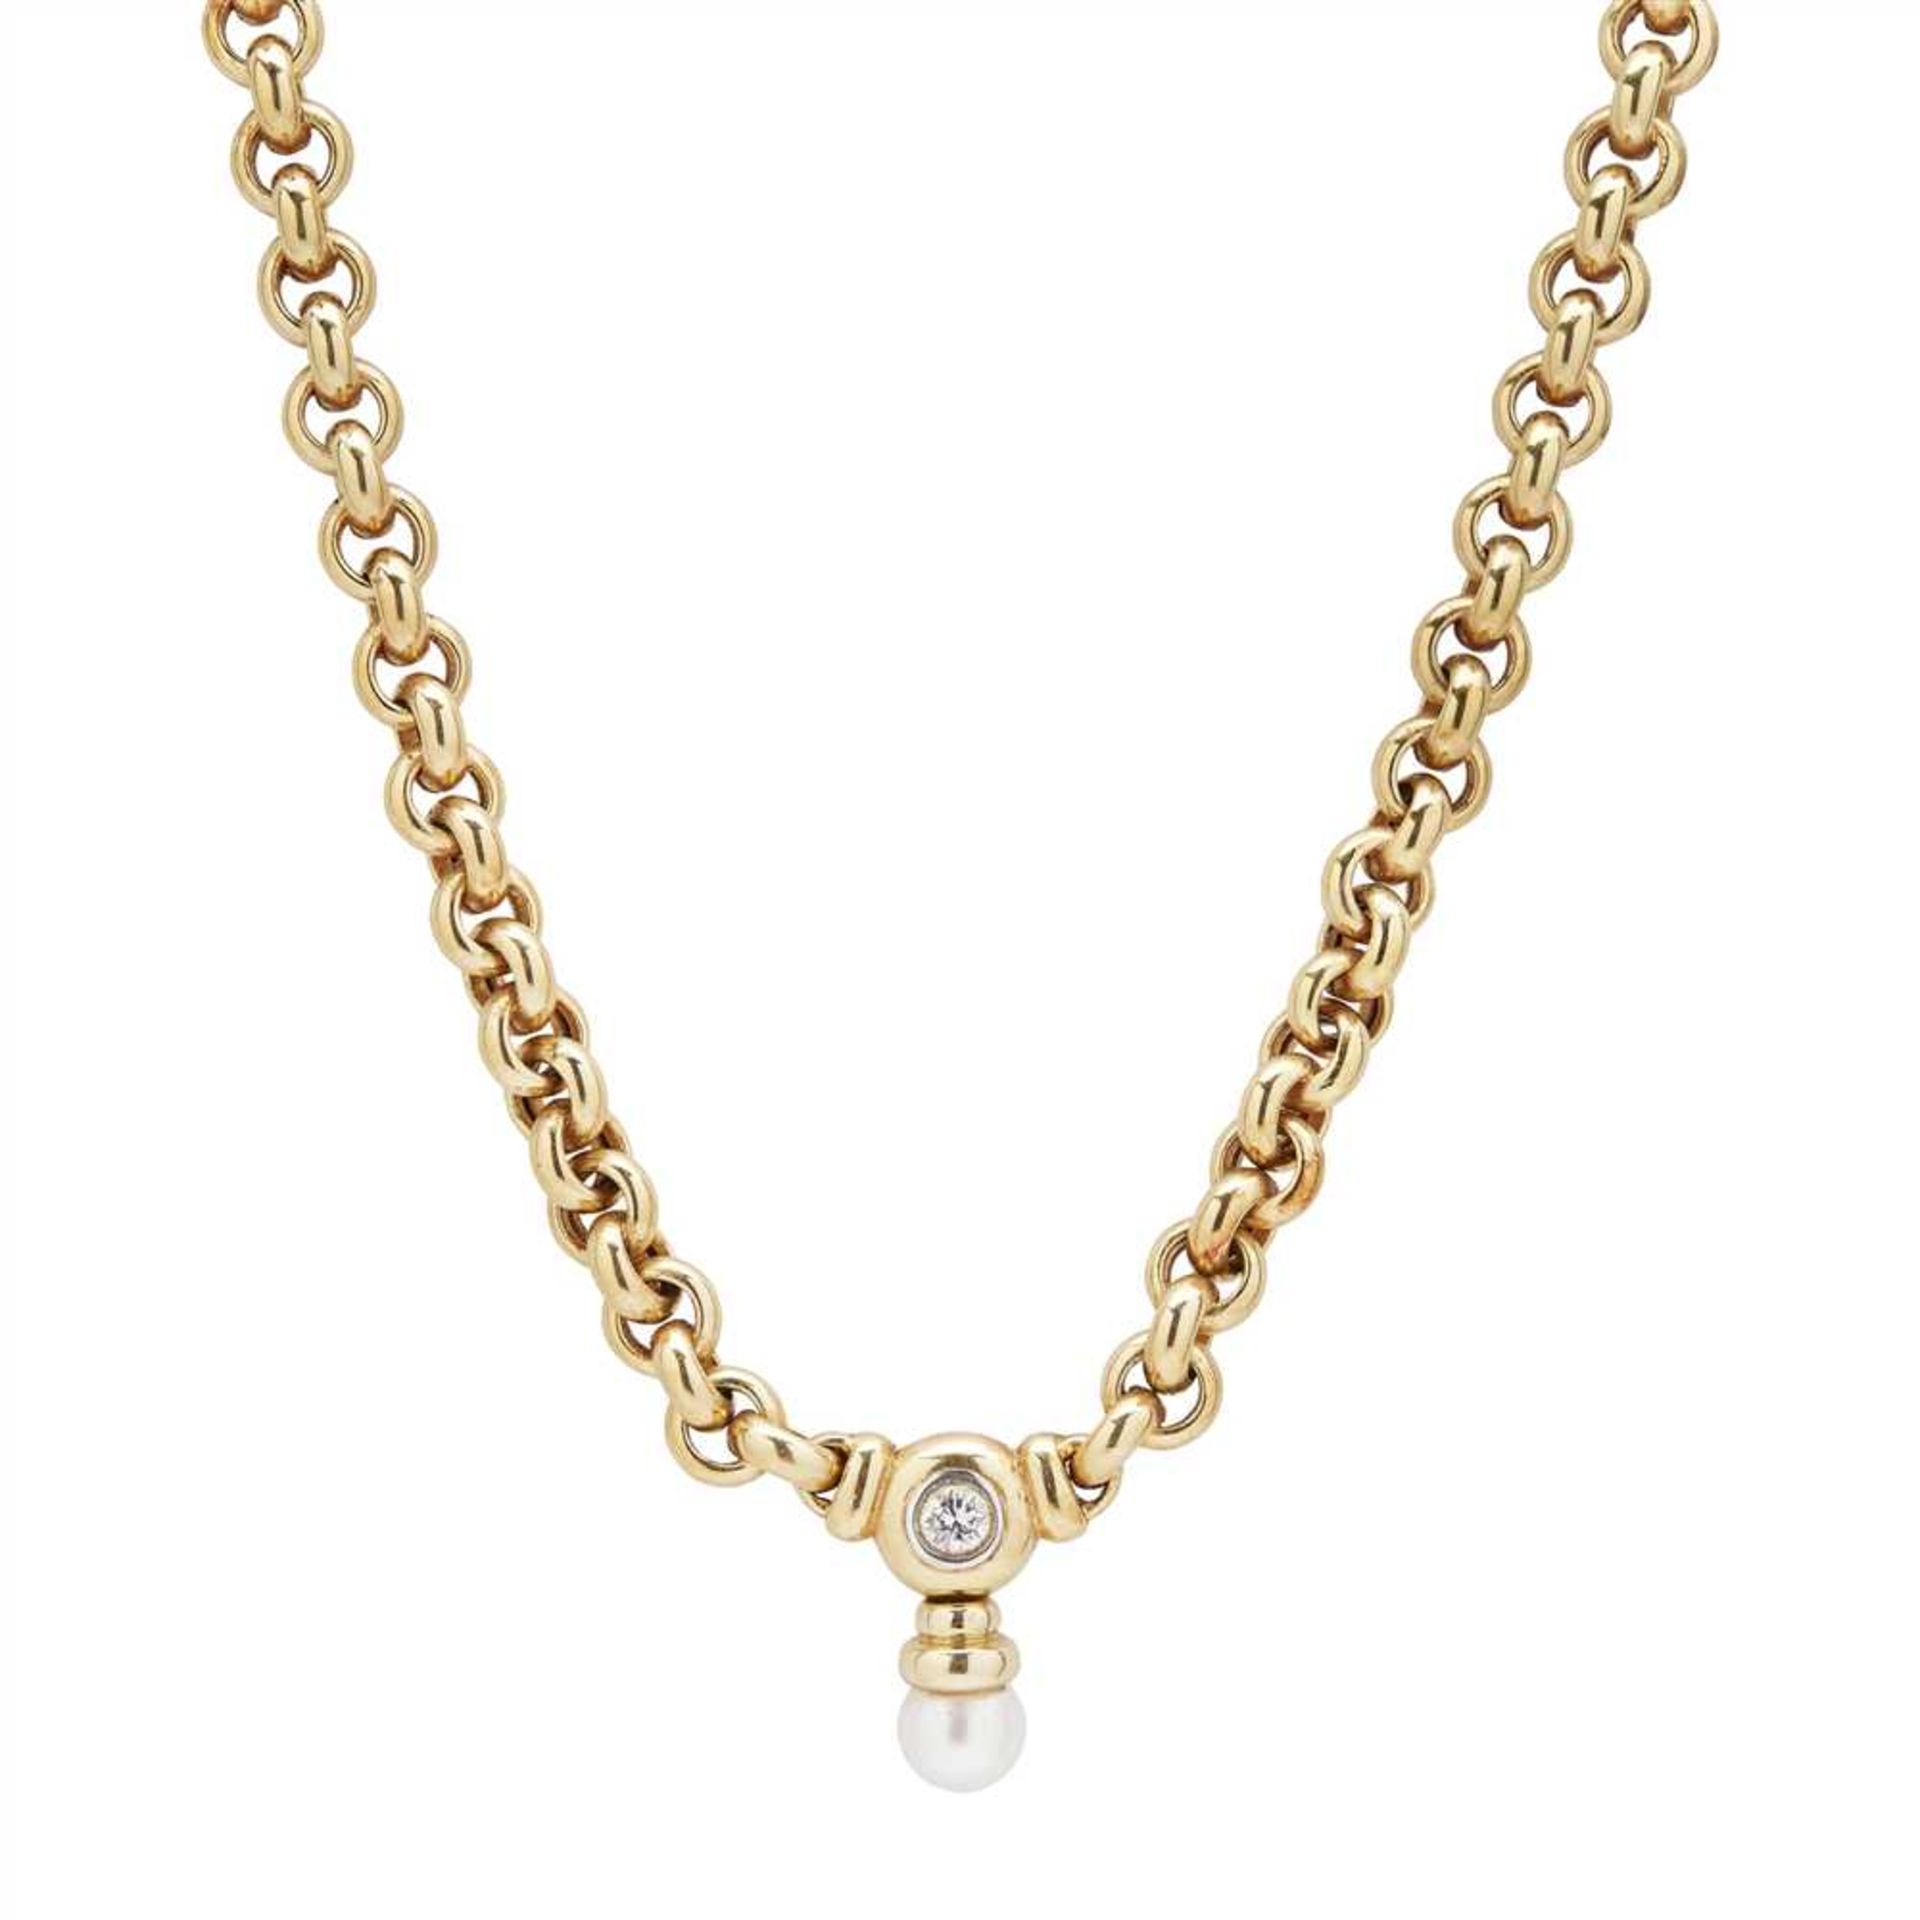 A diamond and pearl set convertible necklace, Garrard - Image 2 of 4